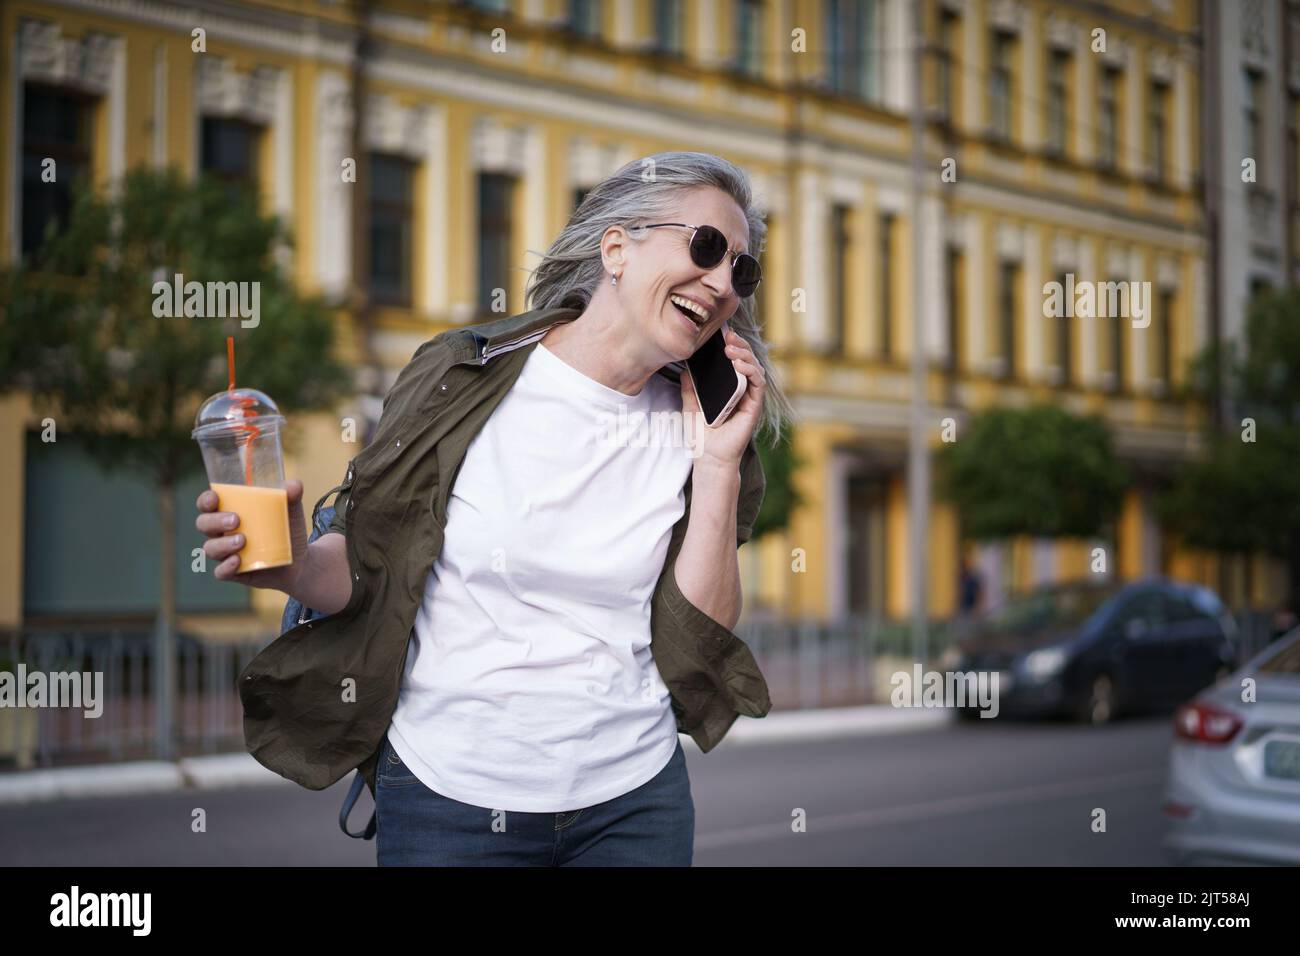 Happy mature European woman laughing talking on the phone enjoying free time after work or traveling having juice on the go using plastic cup in city background. Enjoying life mature woman.  Stock Photo